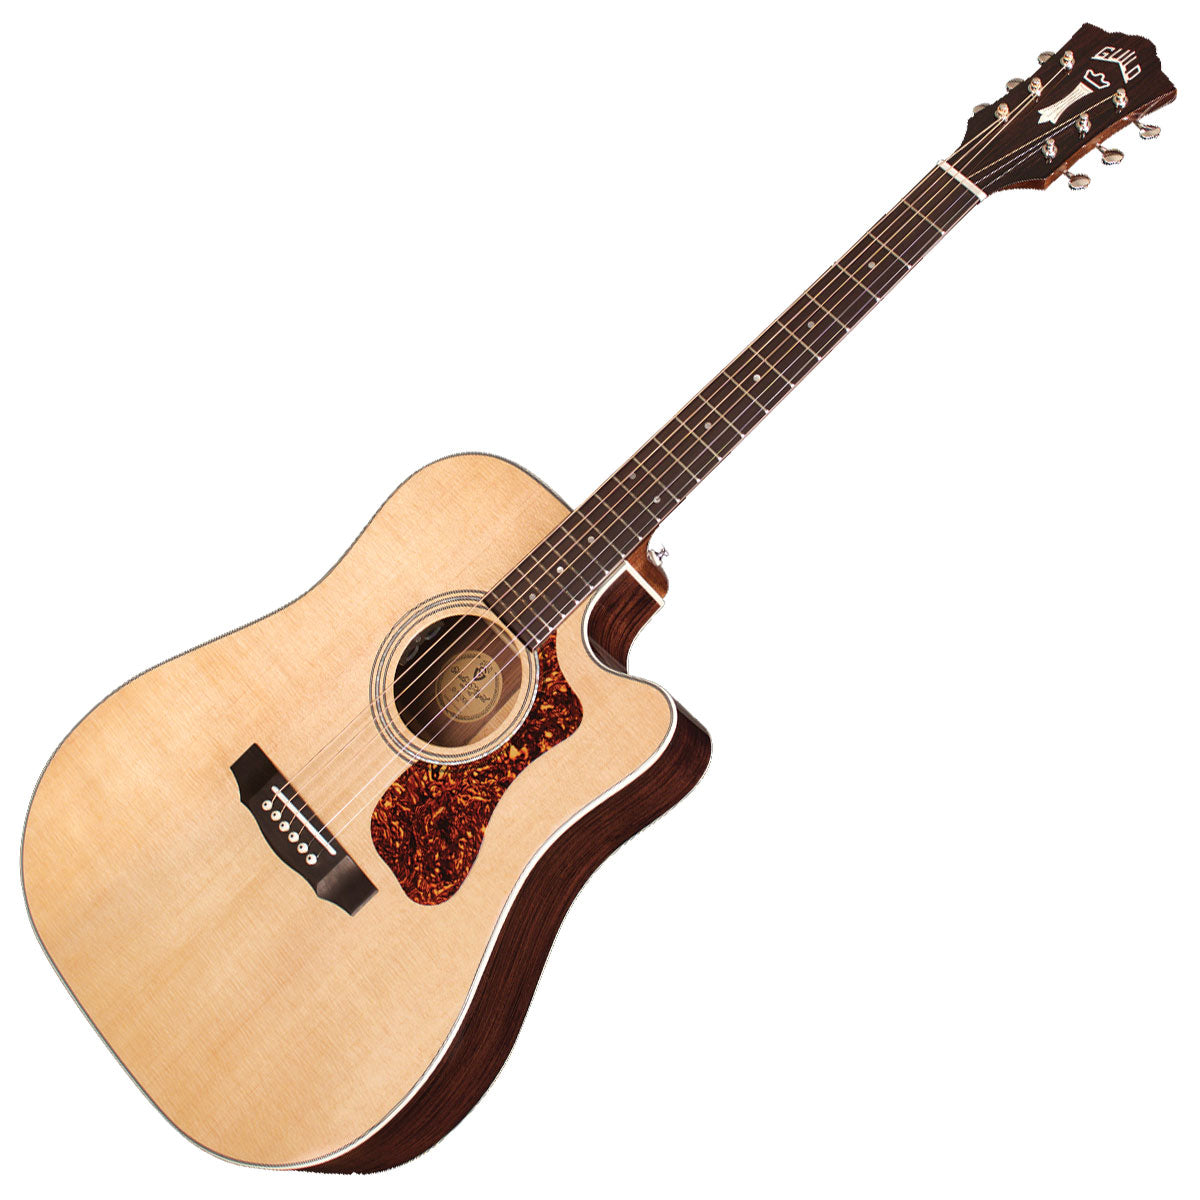 Guild D-150 Acoustic/Electric Guitar with bag - Natural